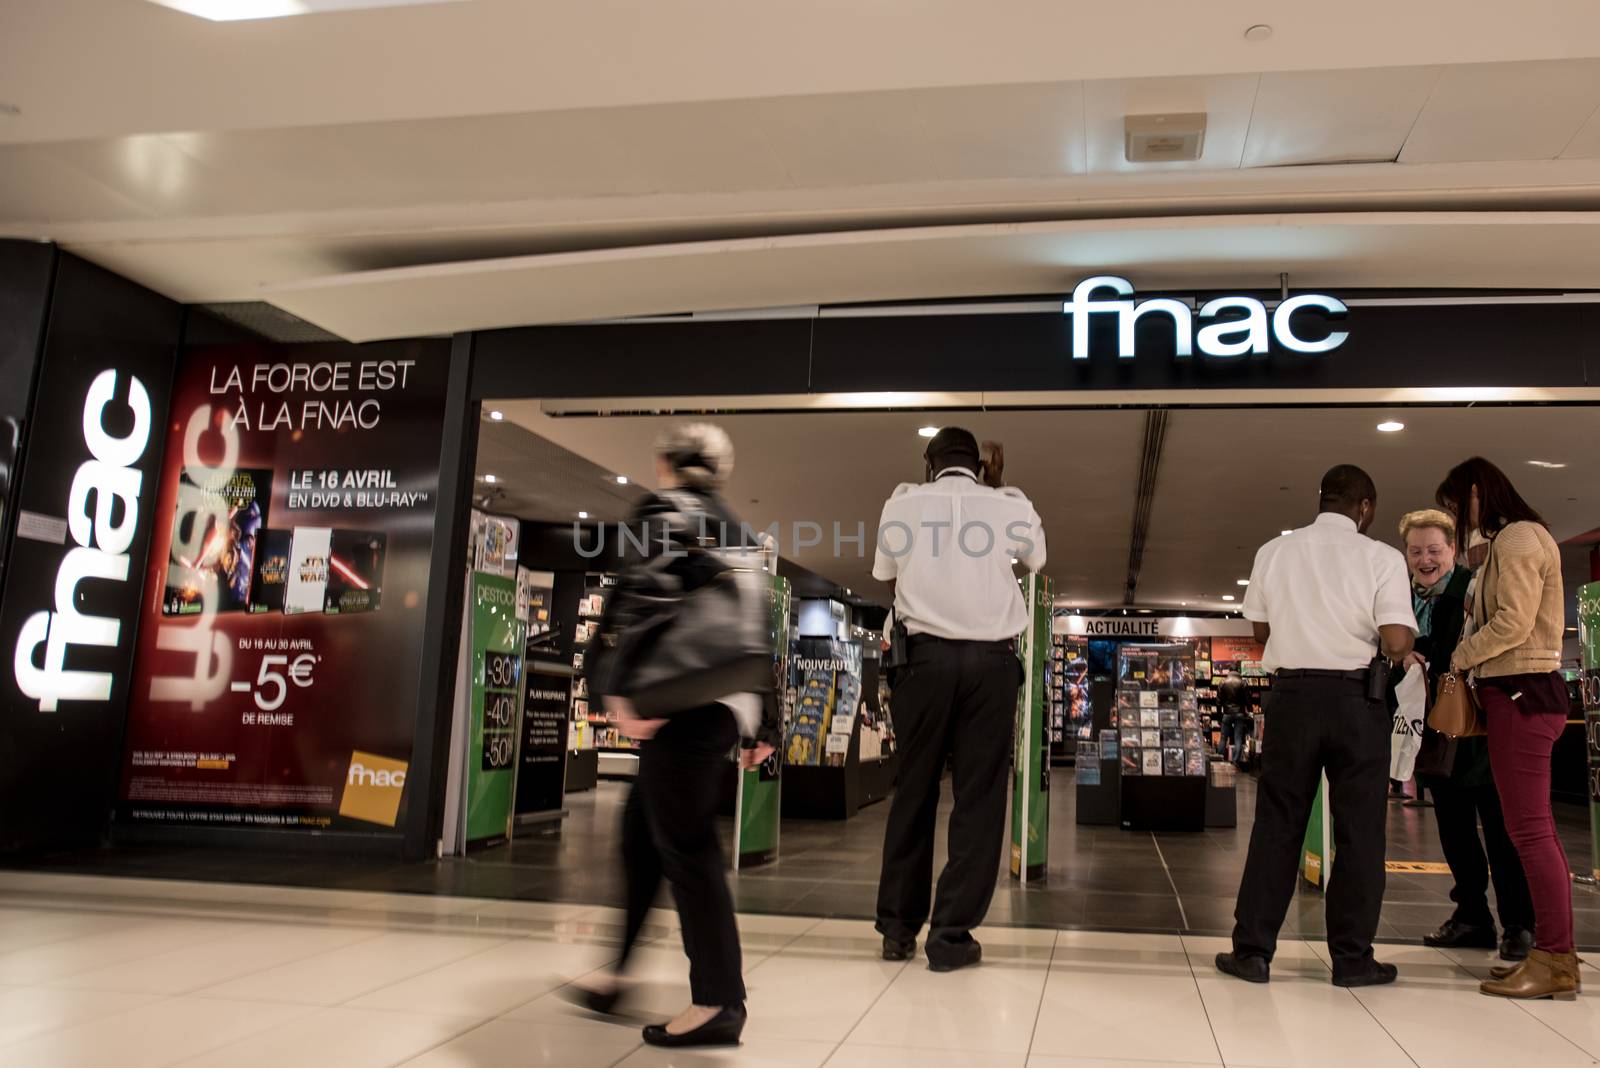 FRANCE, Paris: A picture is taken of a Fnac store on April 22, 2016 as the battle for Europe's third-largest electrical goods retailer Darty intensifies as Conforama, owned by South African retail giant Steinhoff and French rival Fnac frantically tried to outbid each other. Five new offers in less than 24 hours on April 21, 2016 lifted Darty shares by more than 23 percent to their highest level since the end of 2010, valuing it at GBP 779 million (USD 1.1 billion, 990 million euros).